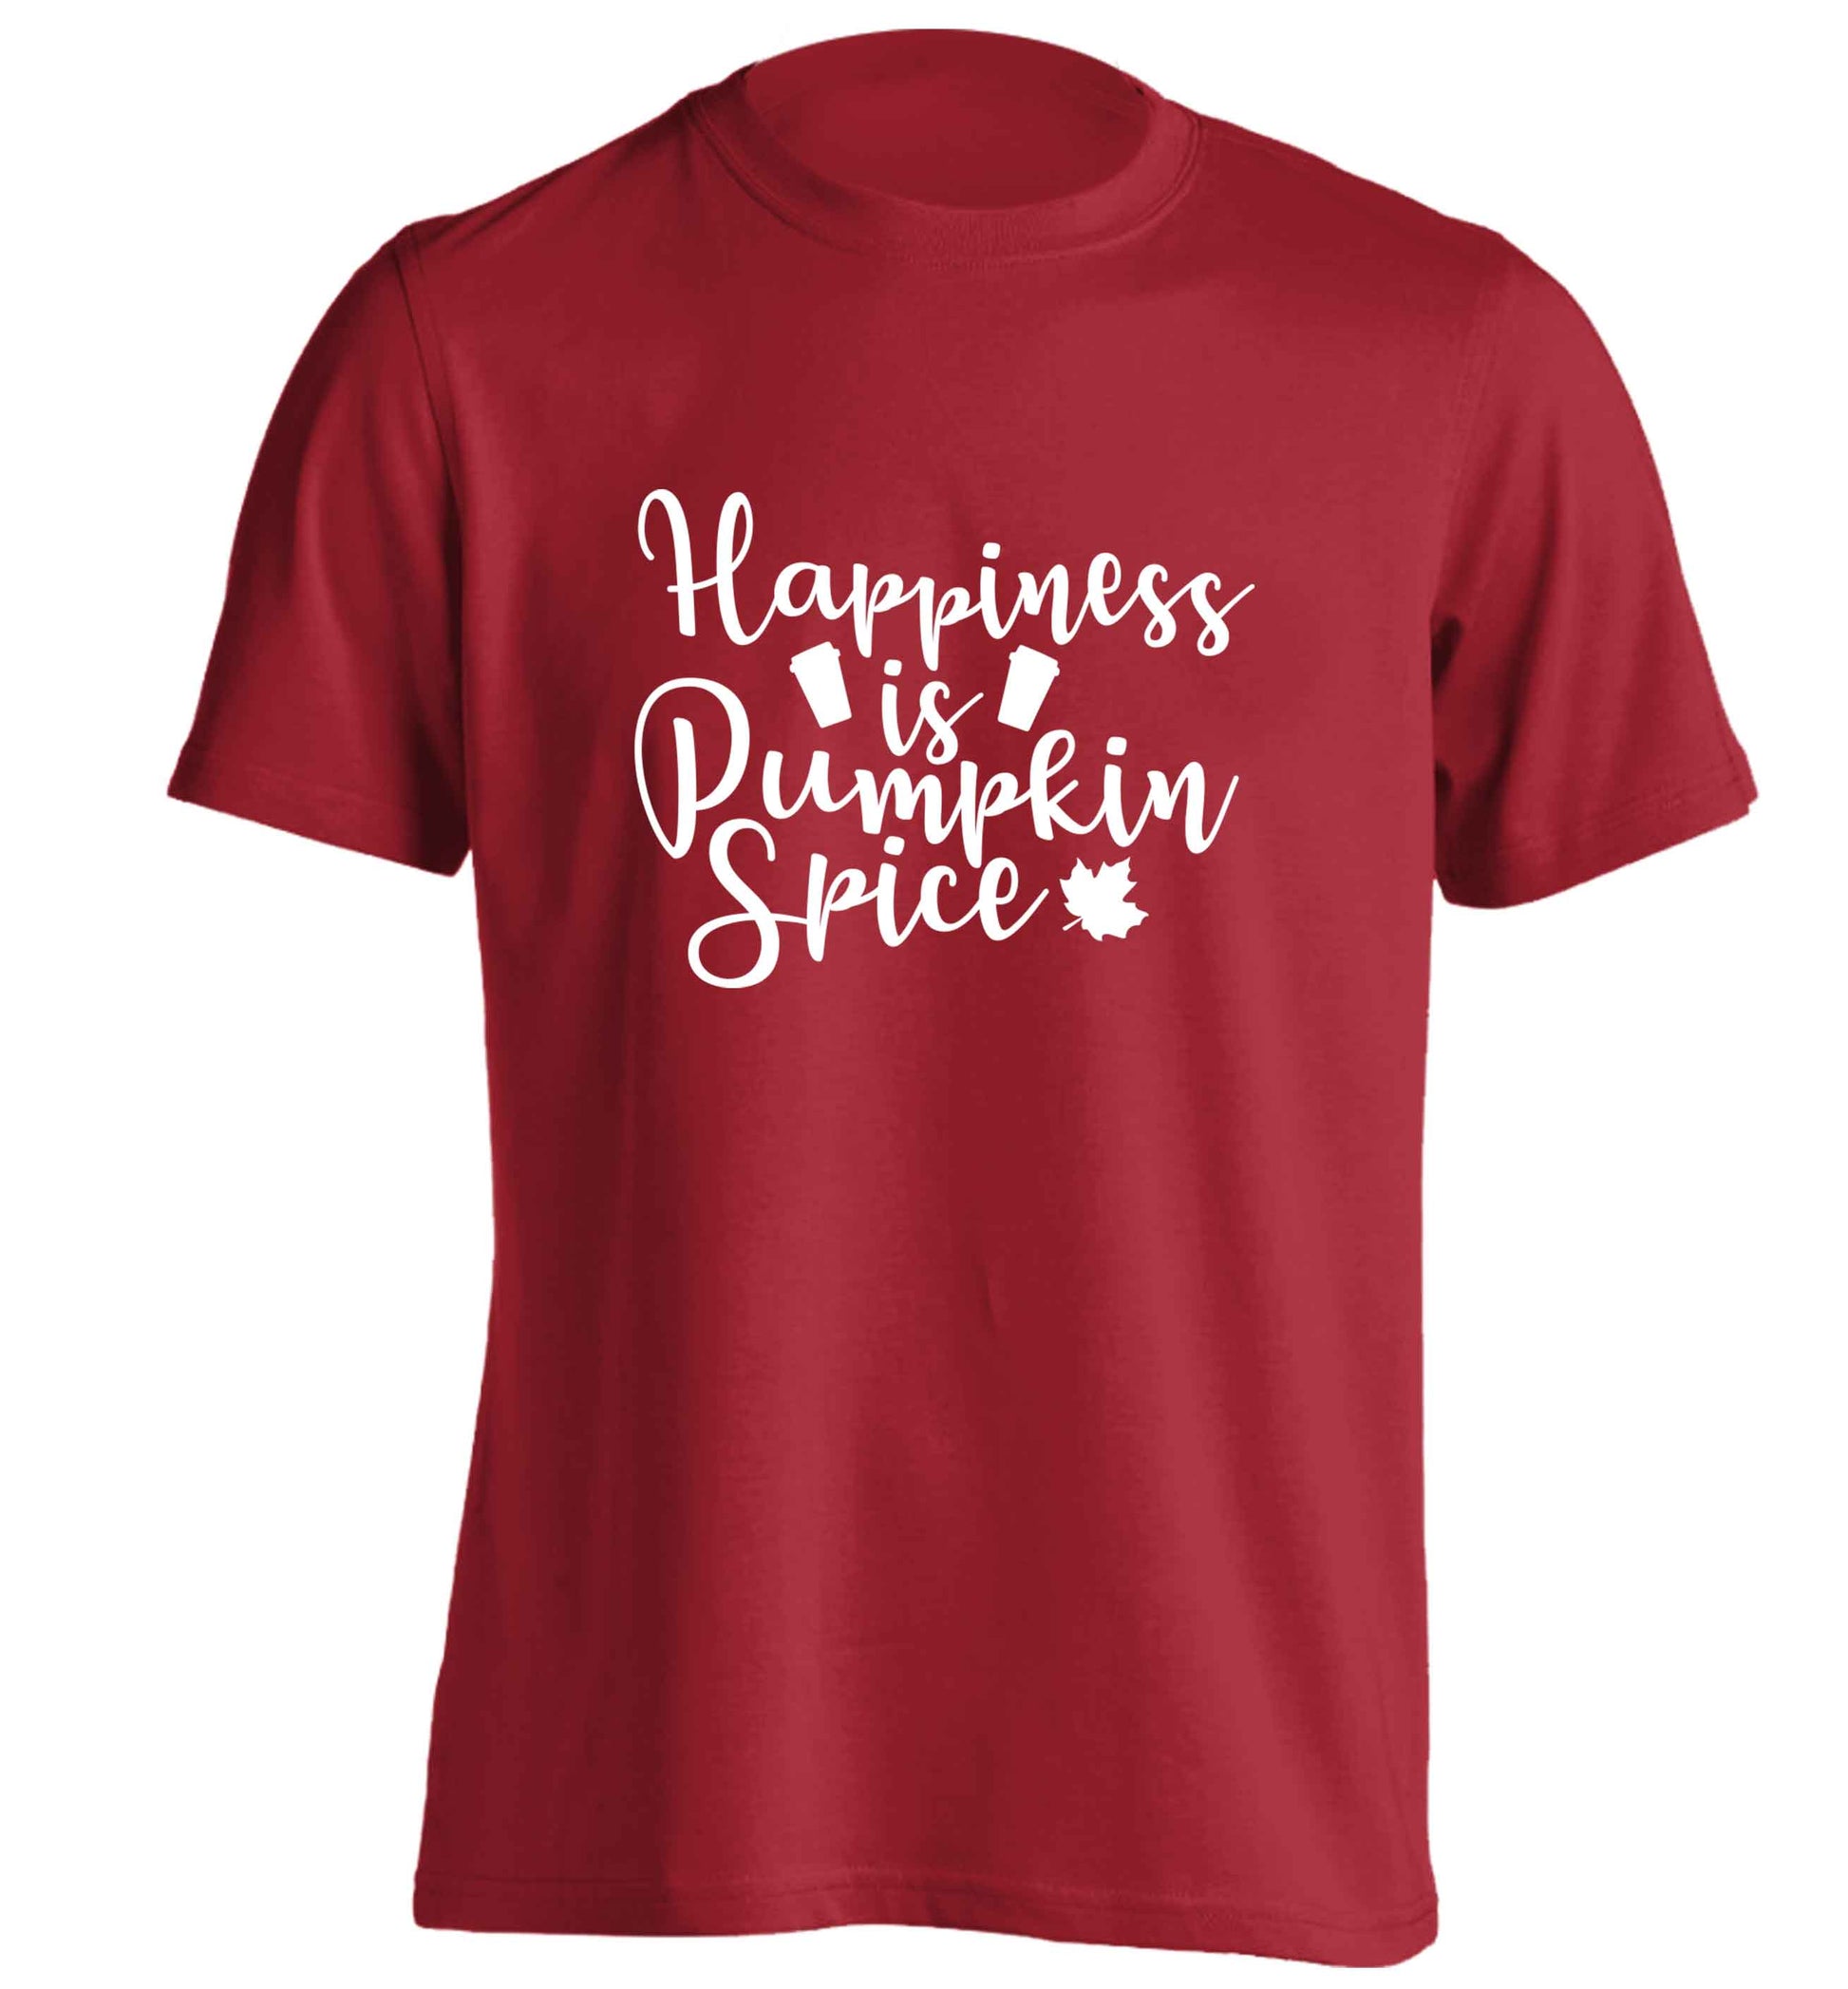 Happiness Pumpkin Spice adults unisex red Tshirt 2XL